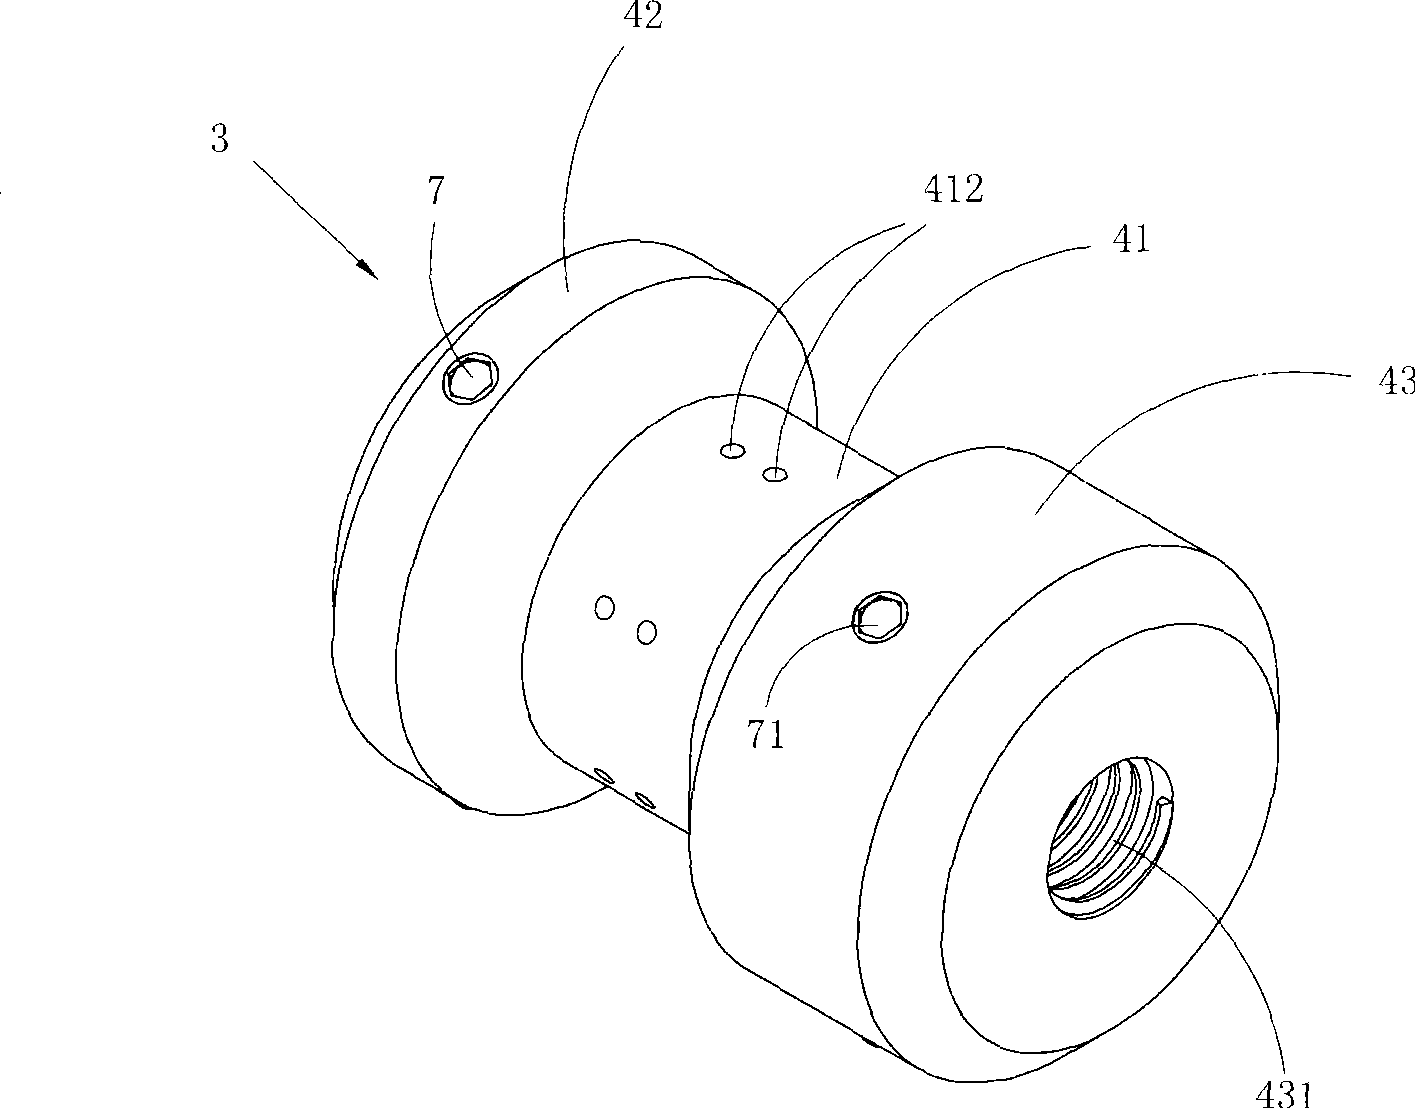 Shield-arc welding device with aerating device inside tube